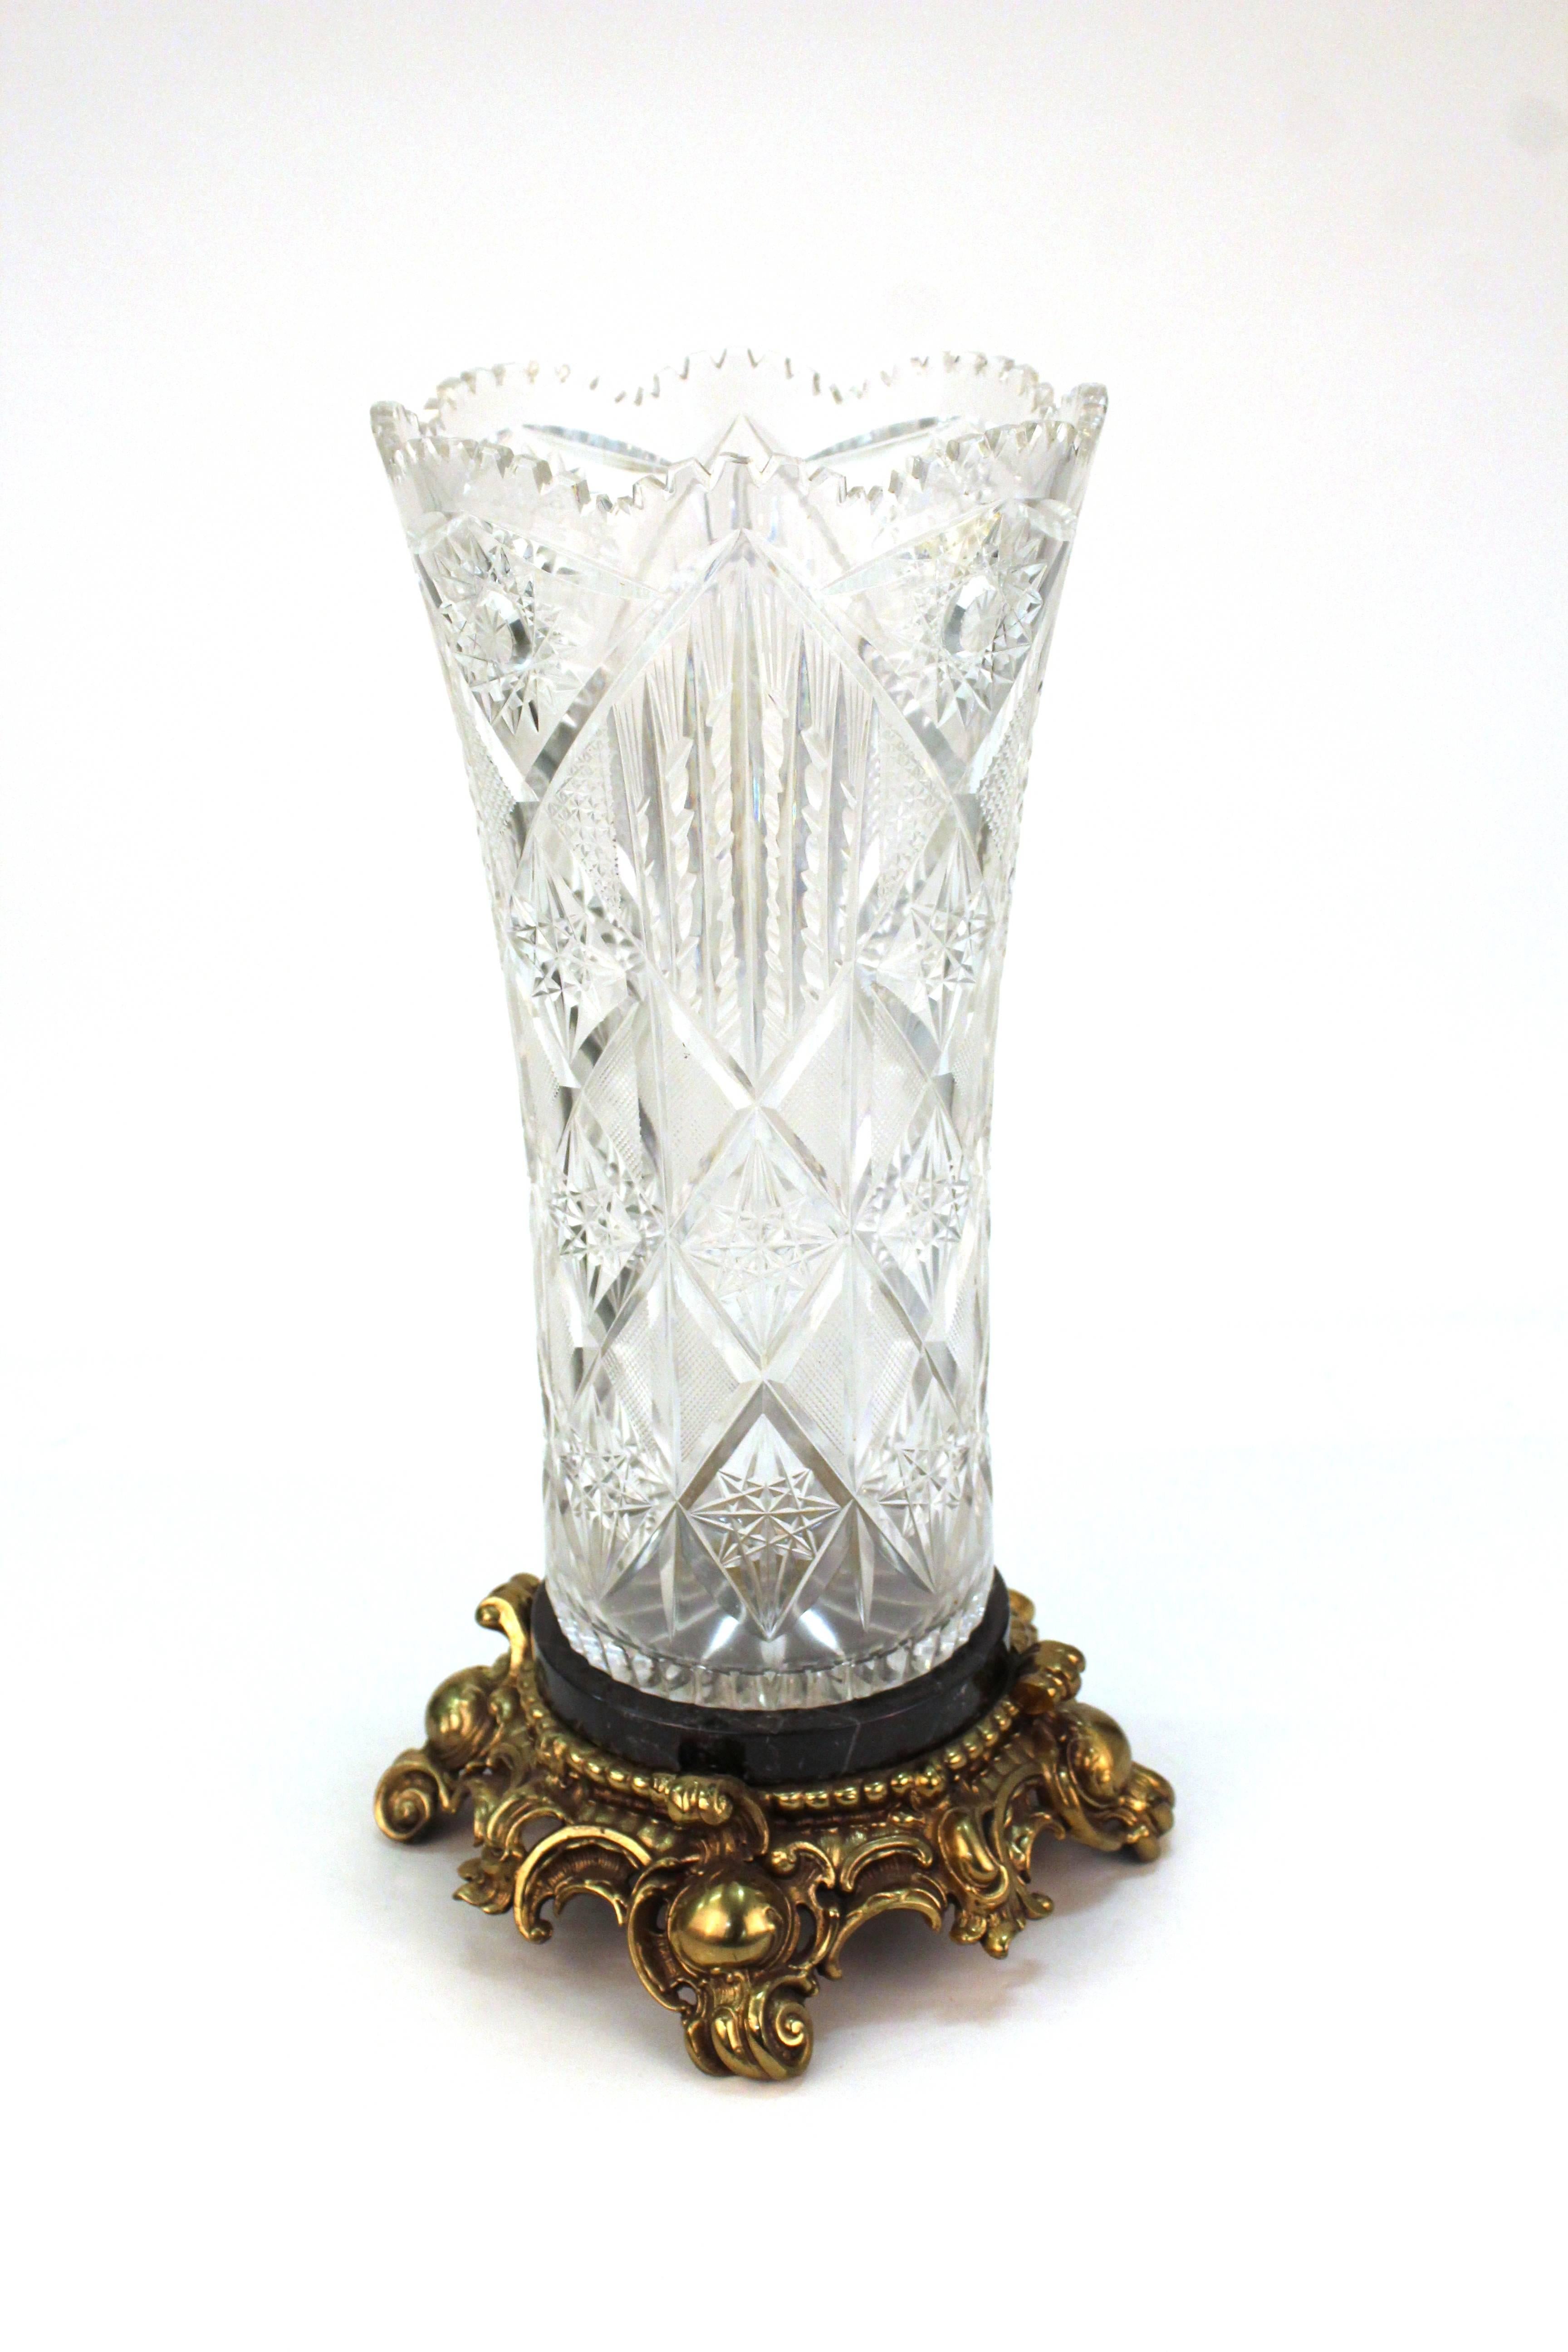 A Victorian era tall cut crystal vase atop a black marble base with elaborately sculpted gilt metal base. The item is in great vintage condition.